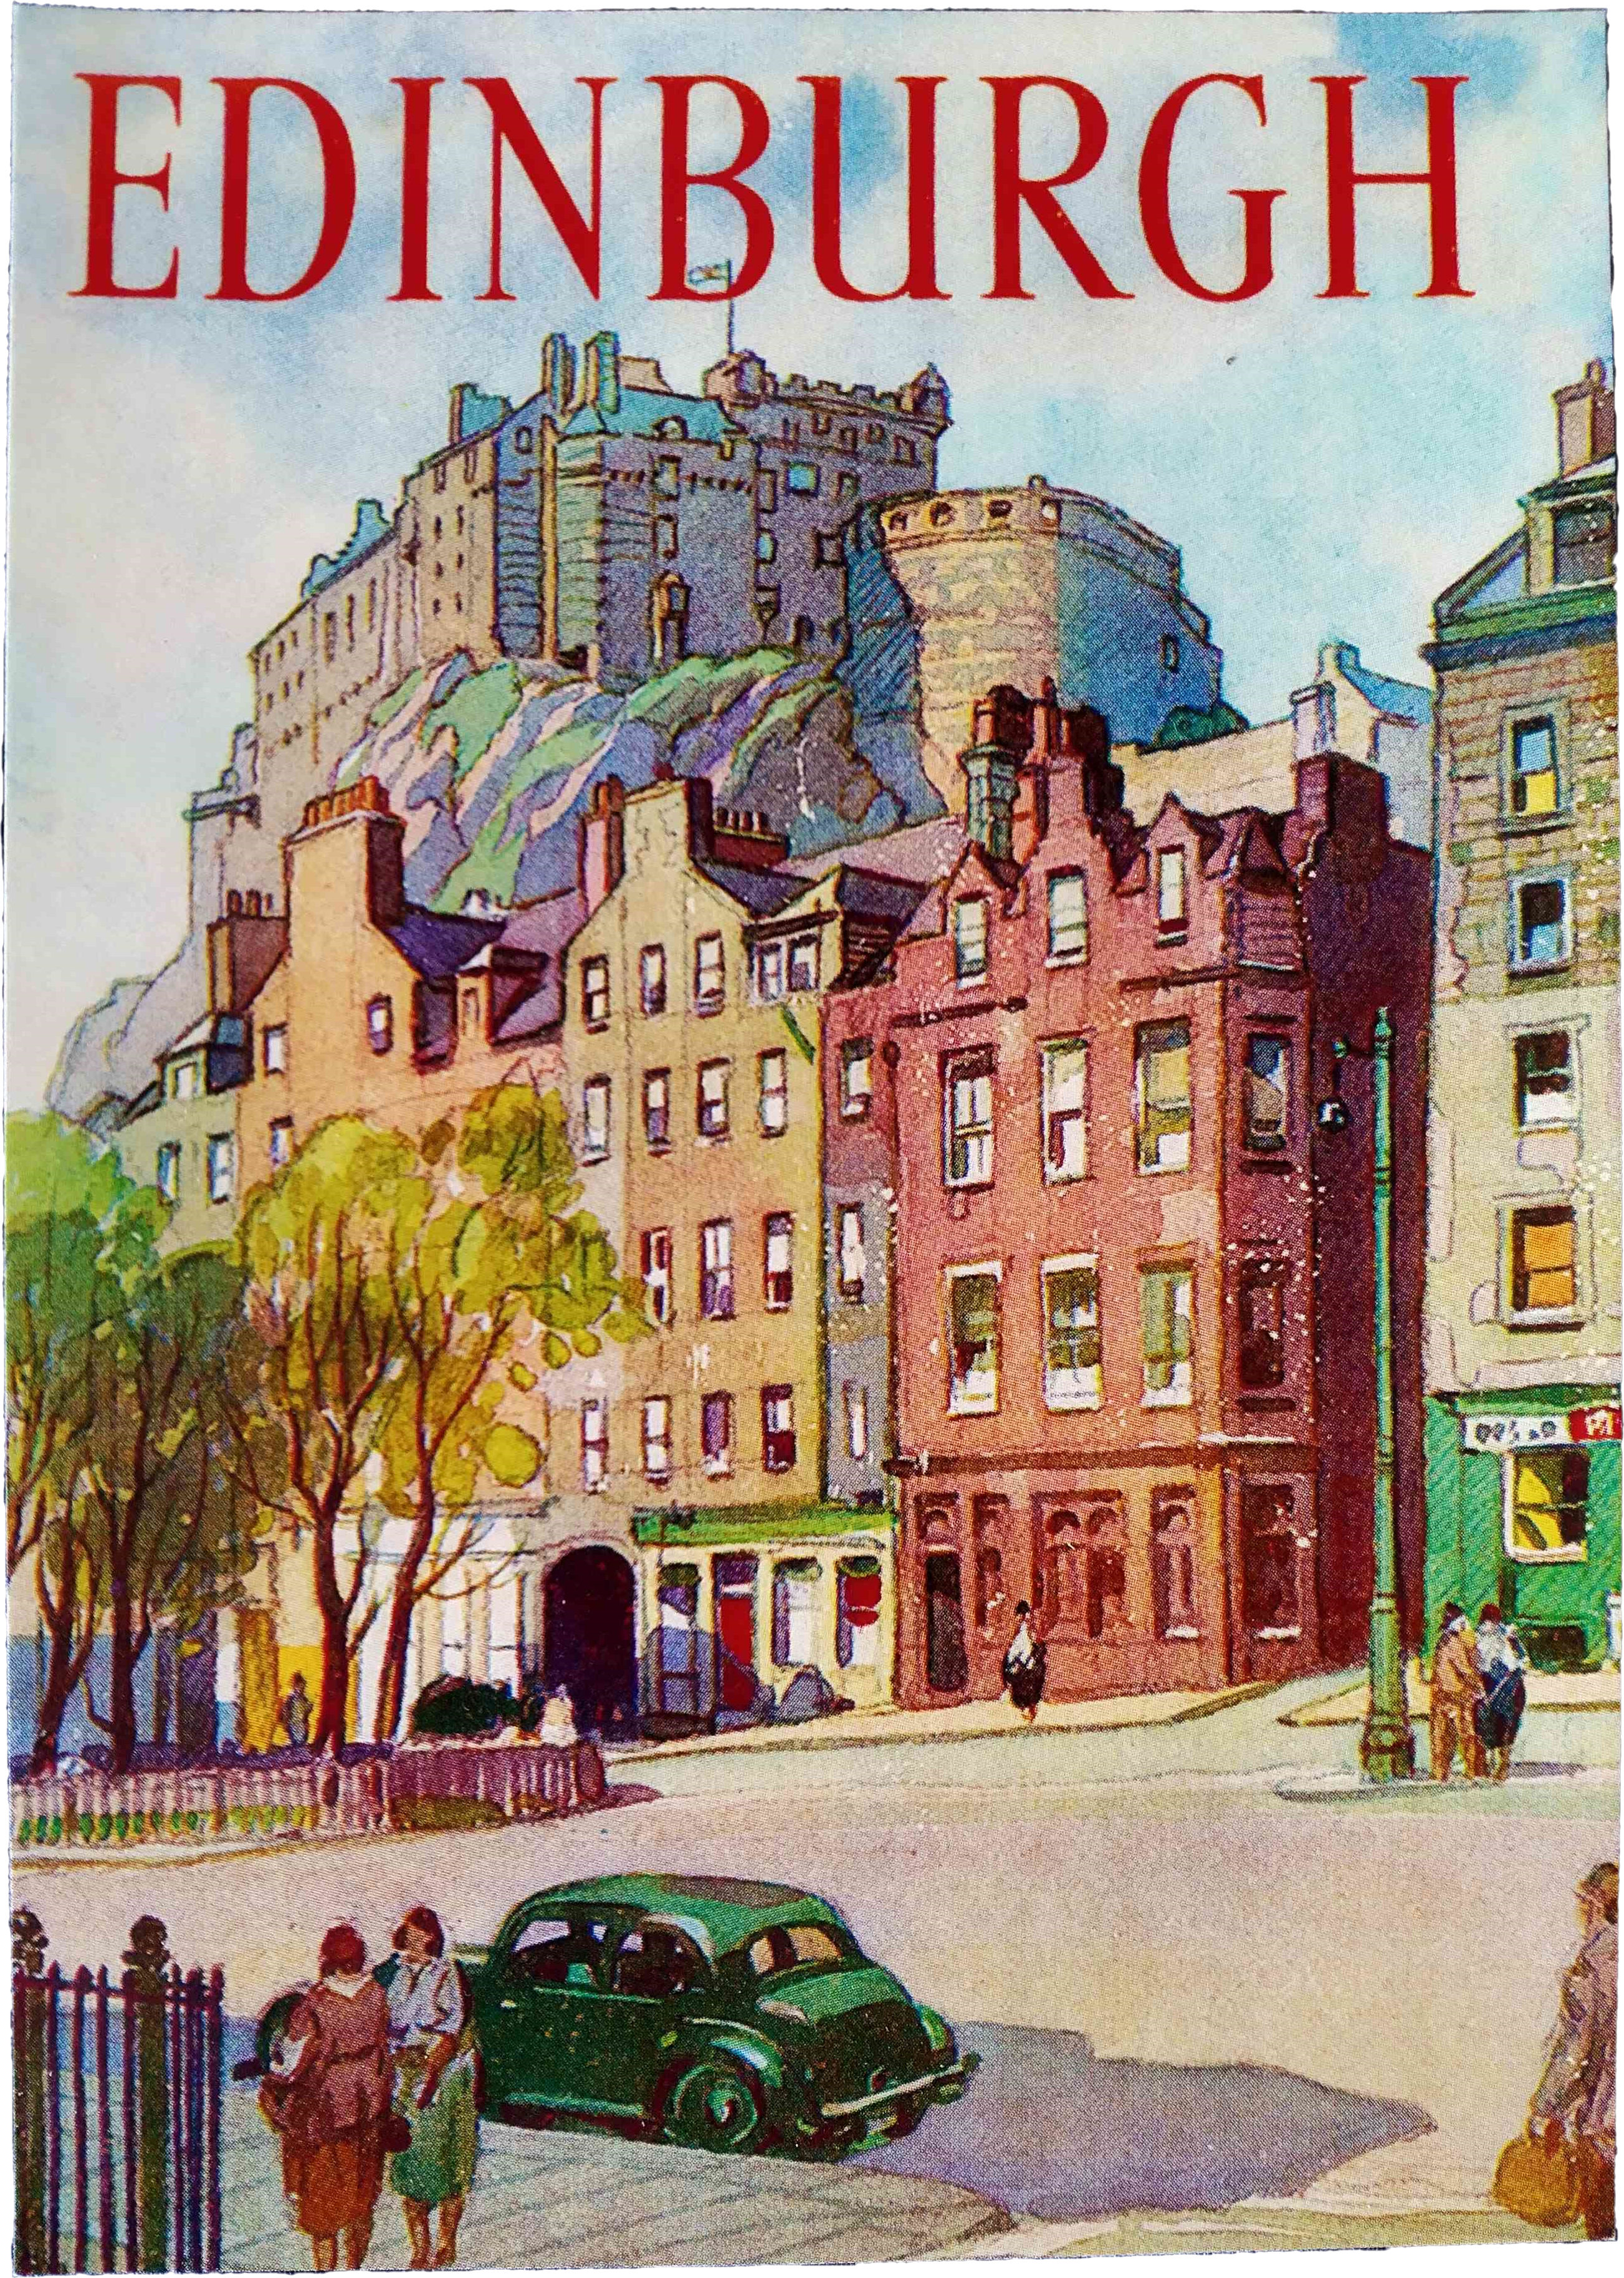 A painting of a mid twentieth century street with a castle behind it and the word 'Edinburgh' written at the top